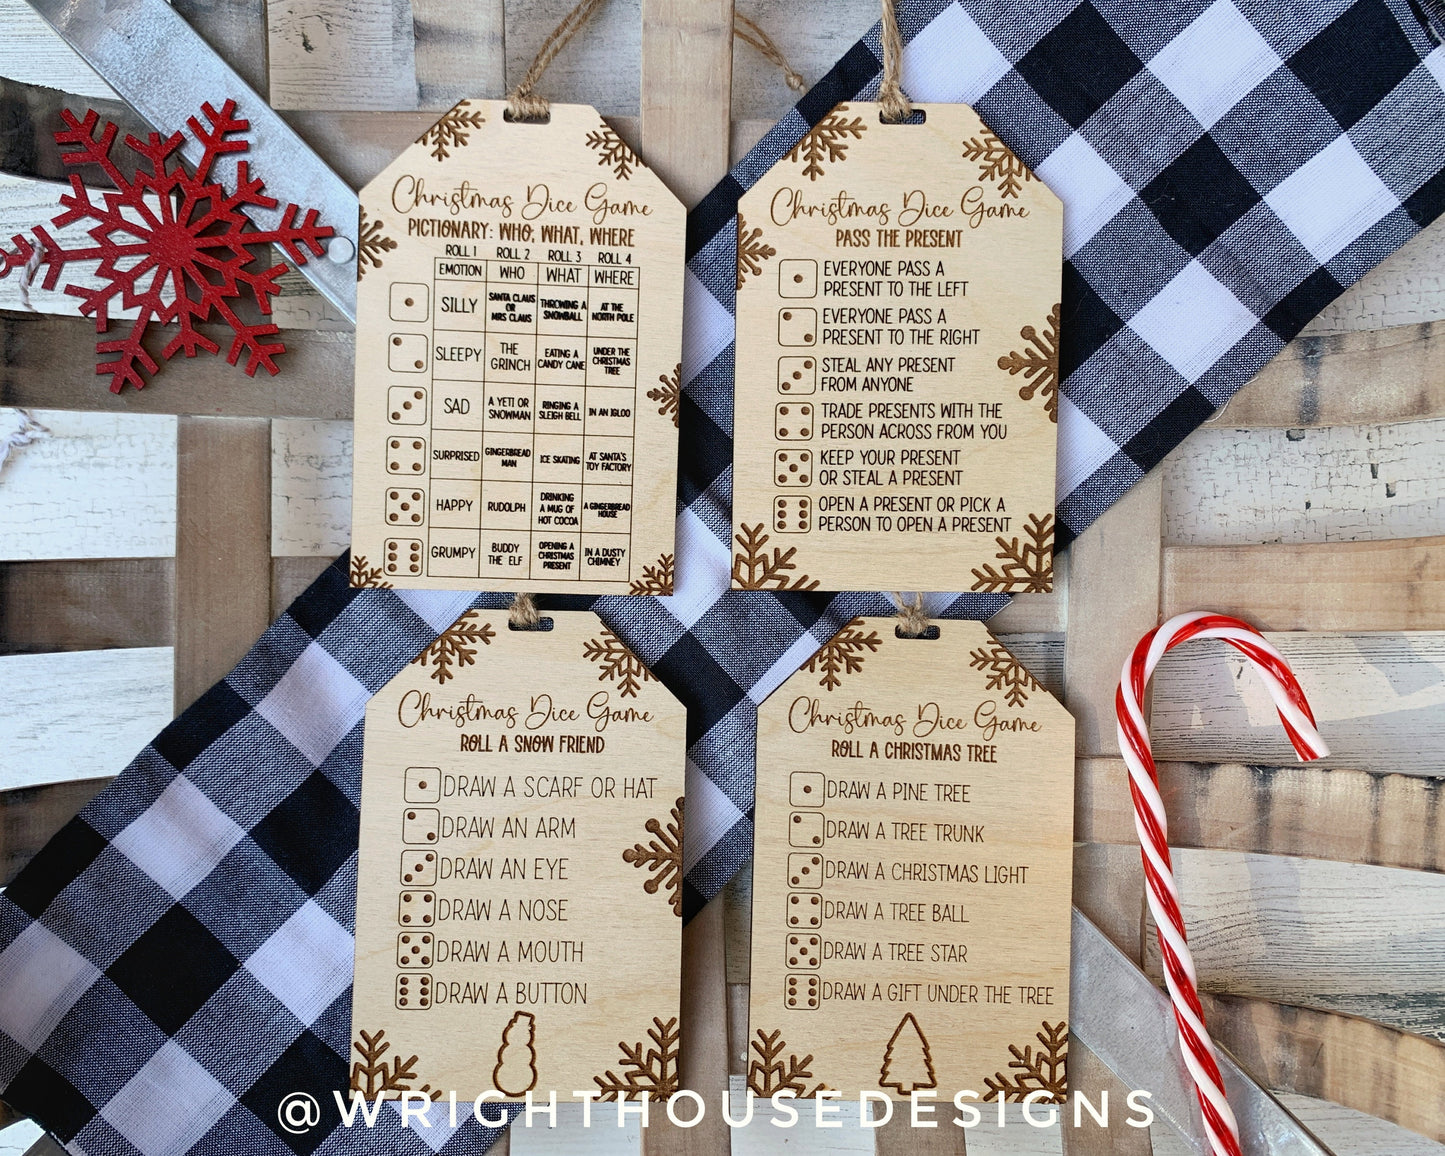 Holiday Dice Game Tags - Gift Exchange Game - Christmas Eve Box - Stocking Stuffers - Secret Santa Gift - Office Party - Family Game Night